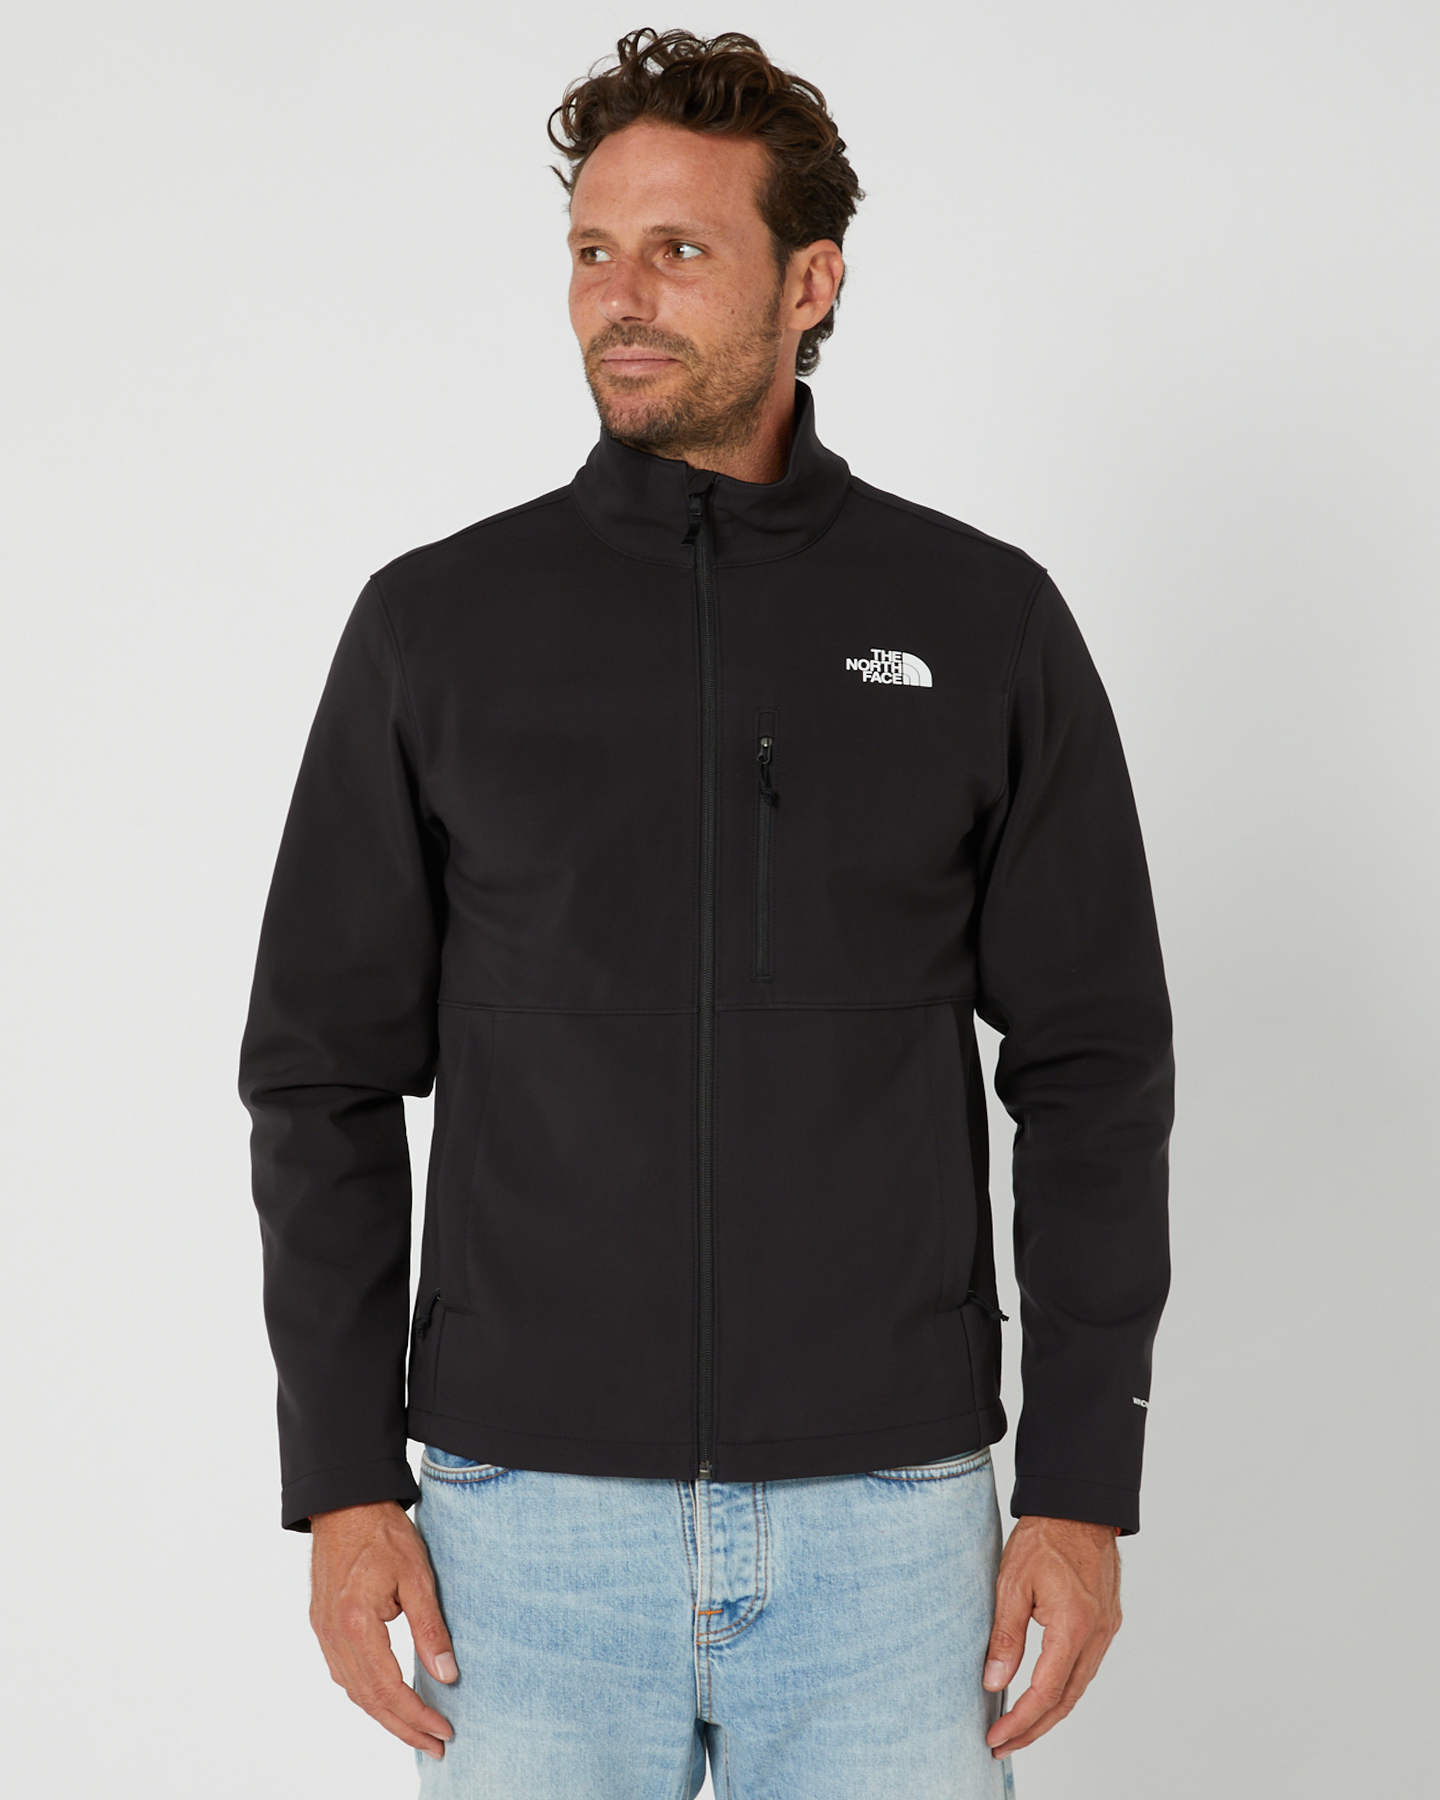 THE NORTH FACE APEX Jacket Black M